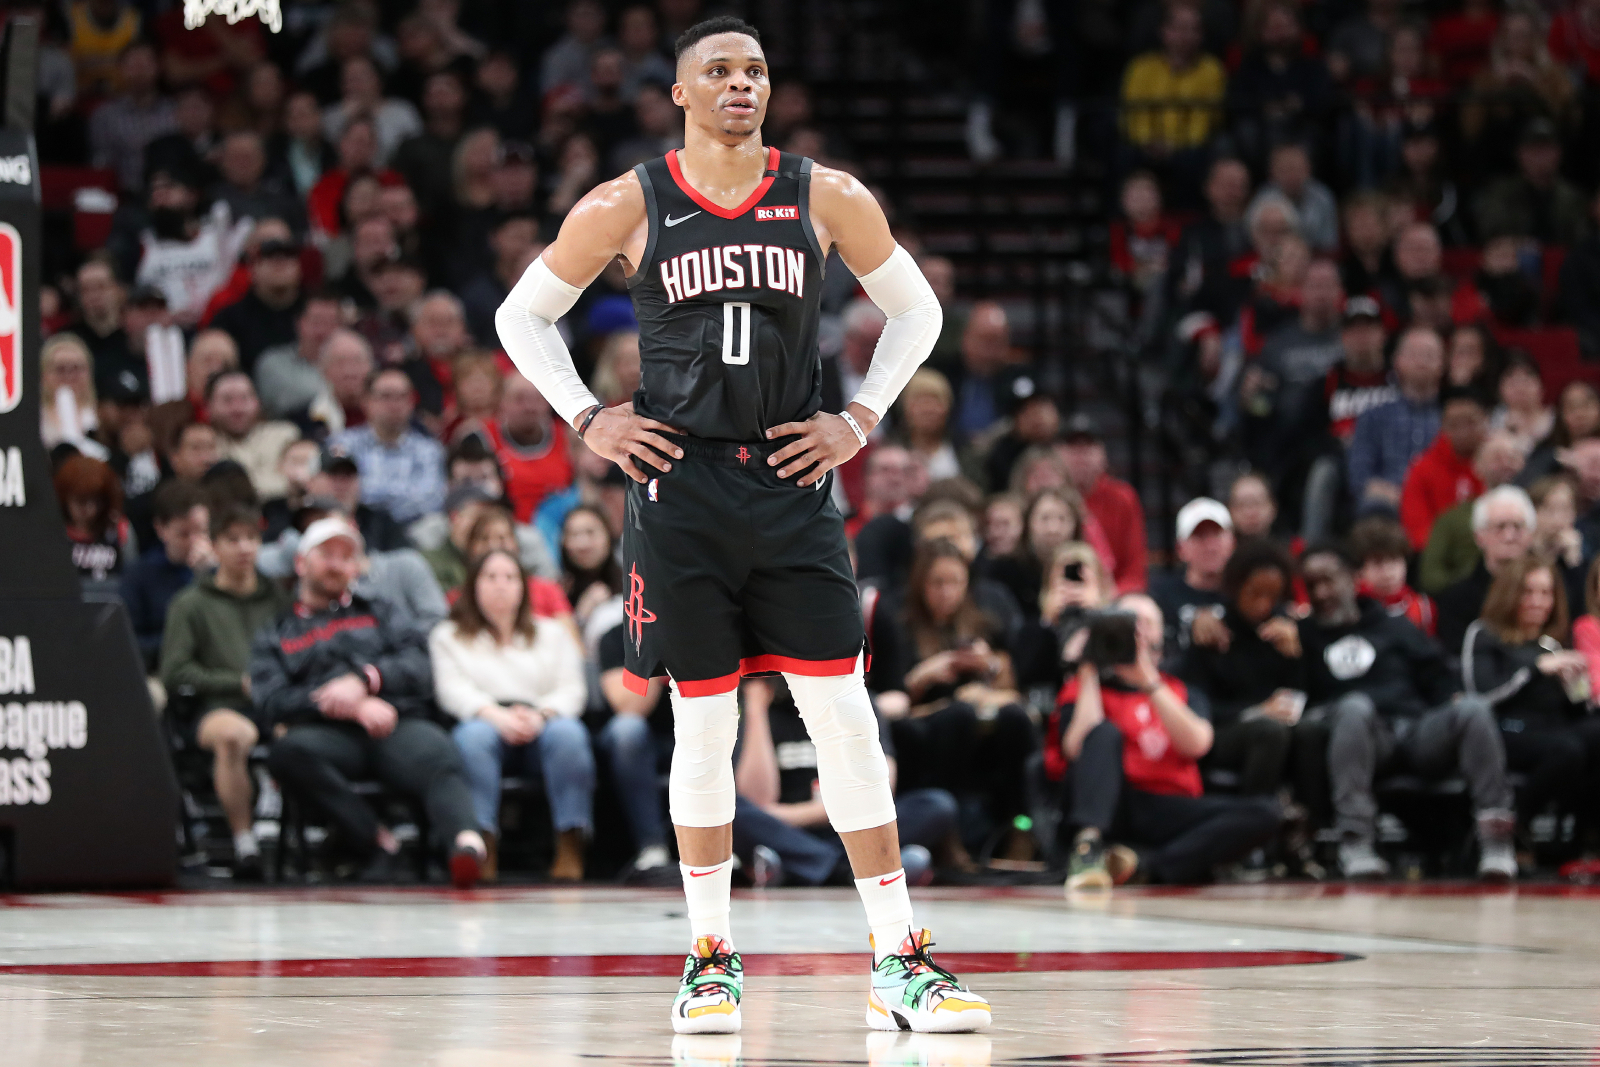 Russell Westbrook and the Houston Rockets will soon take the court again. Westbrook now has a big reason to want to dominate in the bubble.